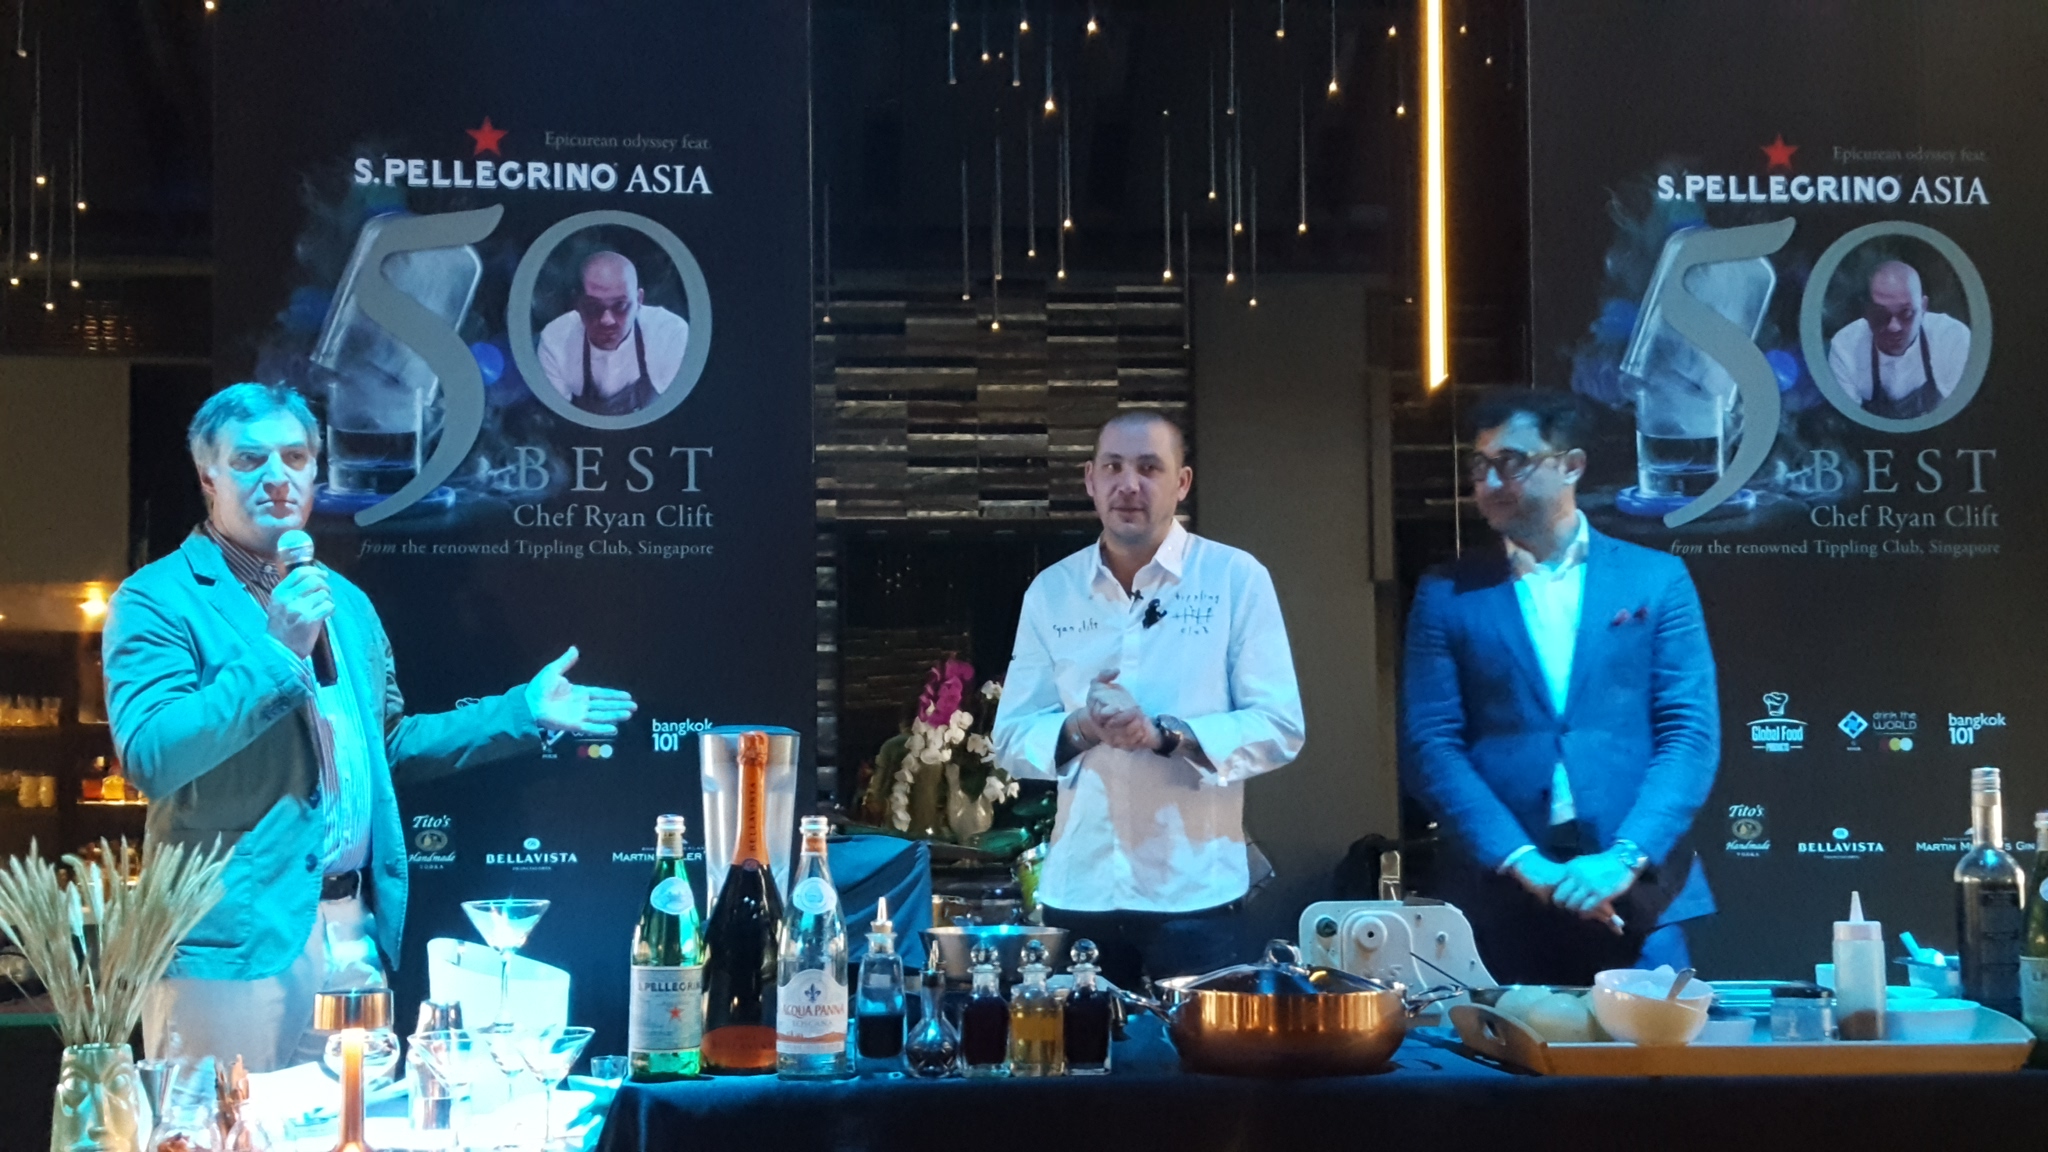 Chef Ryan Clift from ‘Tippling Club’ in Bangkok